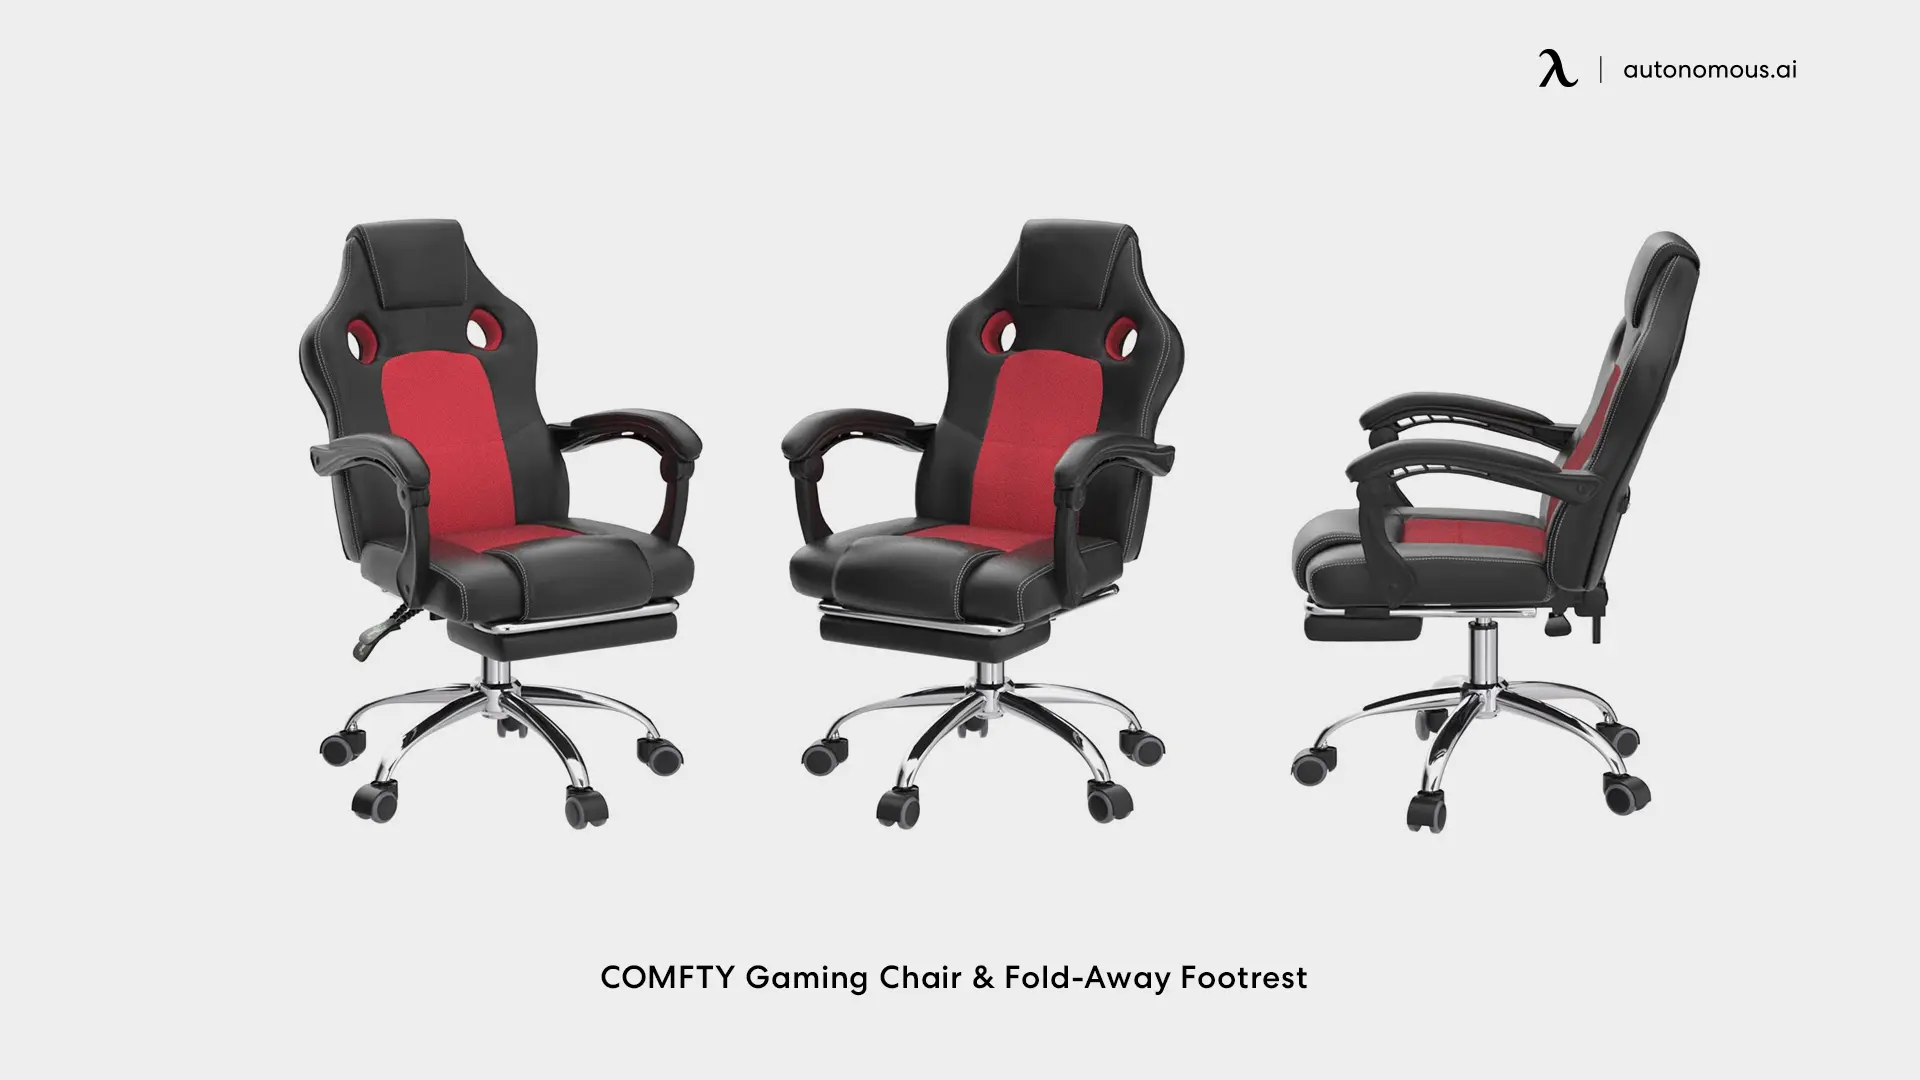 COMFTY Gaming Chair & Fold-Away Footrest